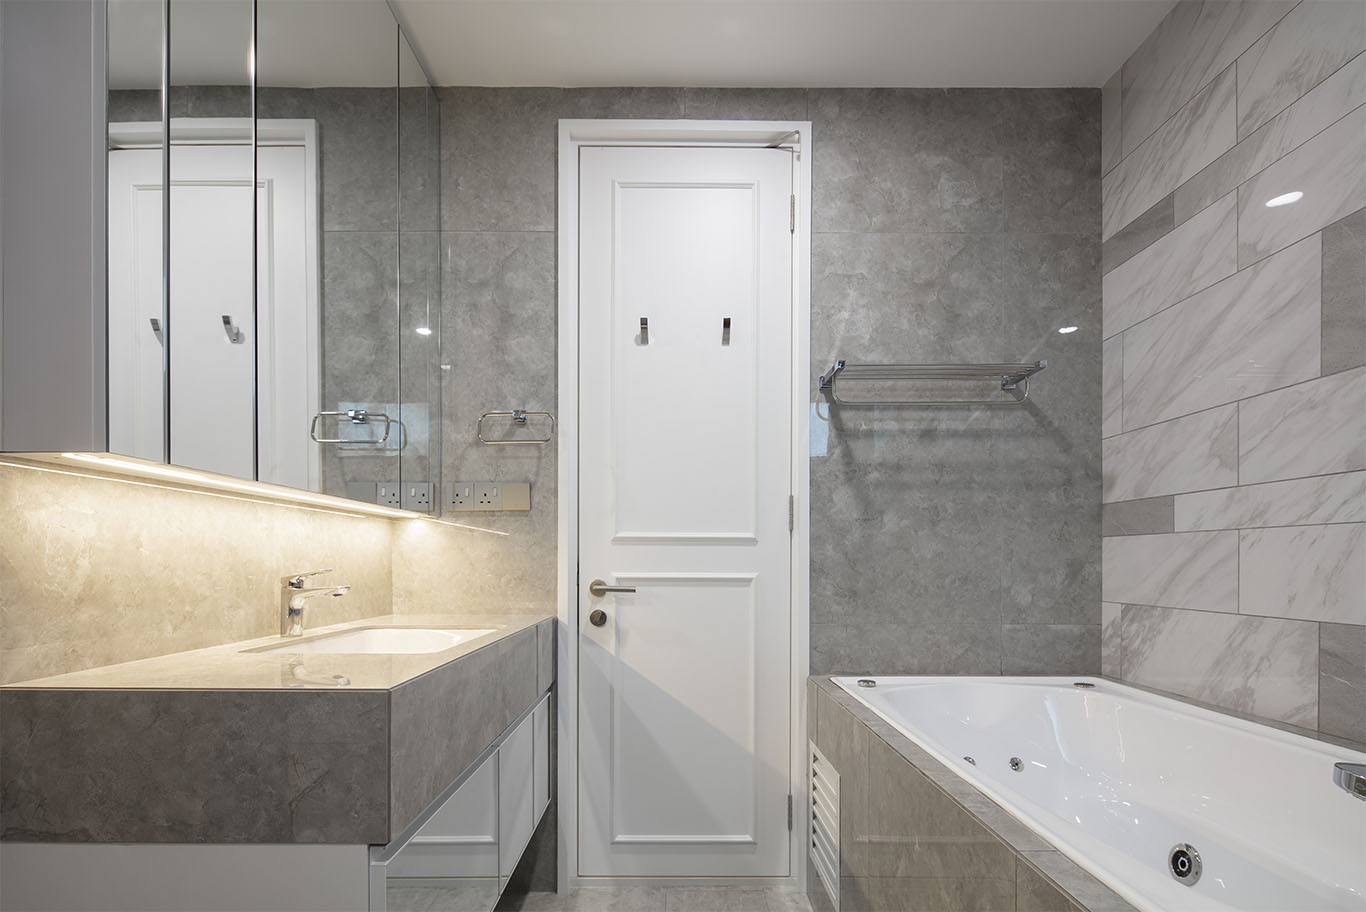 MIEUX The White Royale luxurious bathroom with grey marble wall and sink mieux interior design